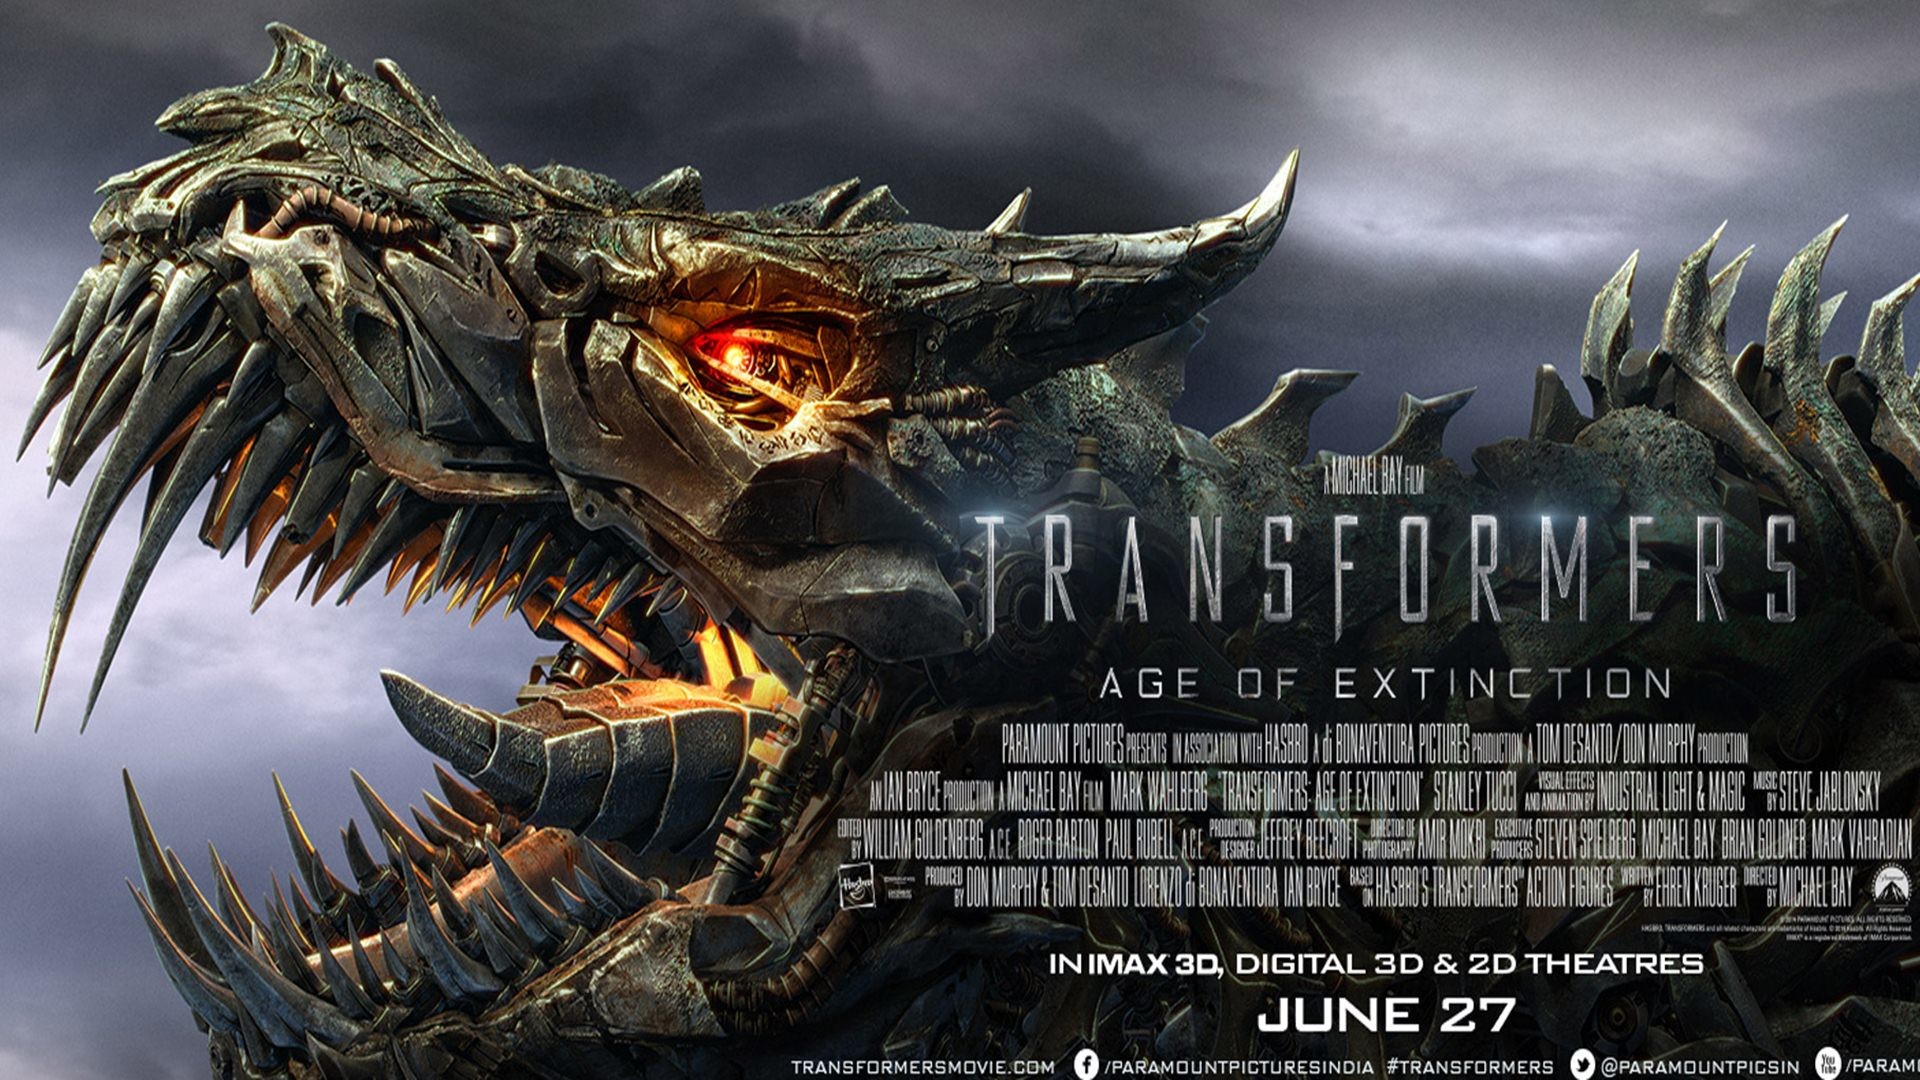 Download Transformers Hd Wallpapers For Free, Shunvmall - Transformer Age Of Extinction Grimlock , HD Wallpaper & Backgrounds